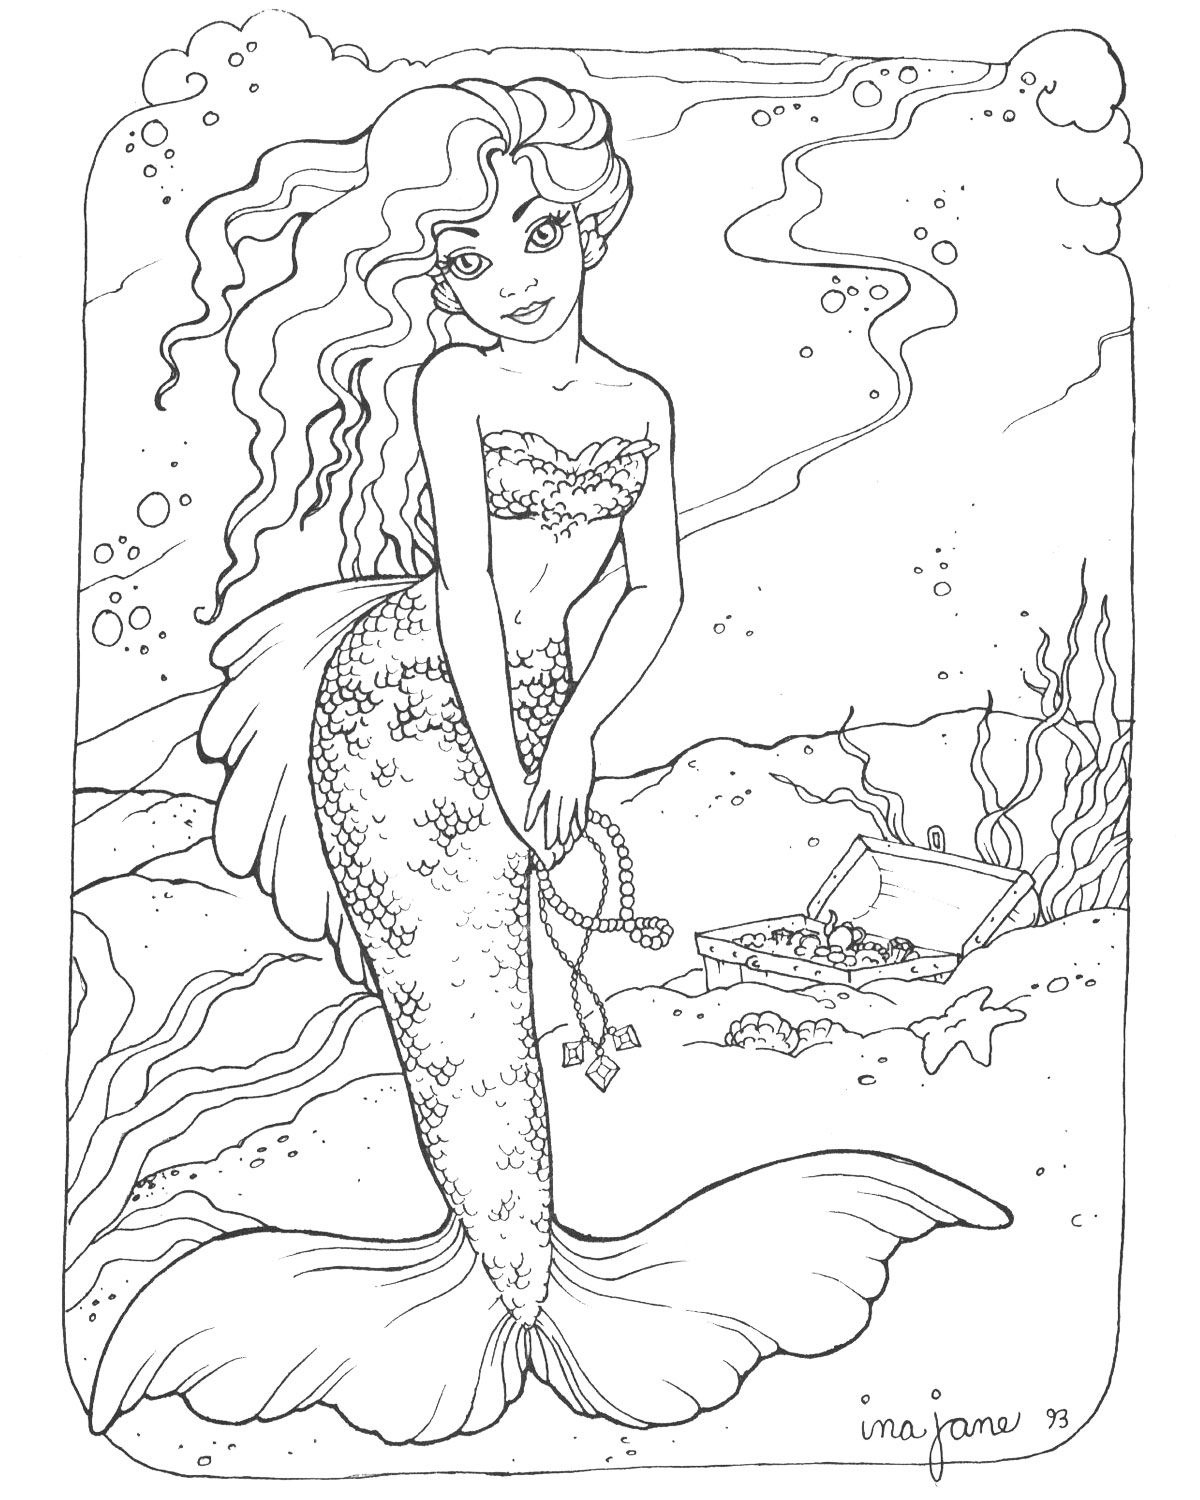 Realistic Mermaid Coloring Pages Download And Print For Free - Free Printable Mermaid Coloring Pages For Adults